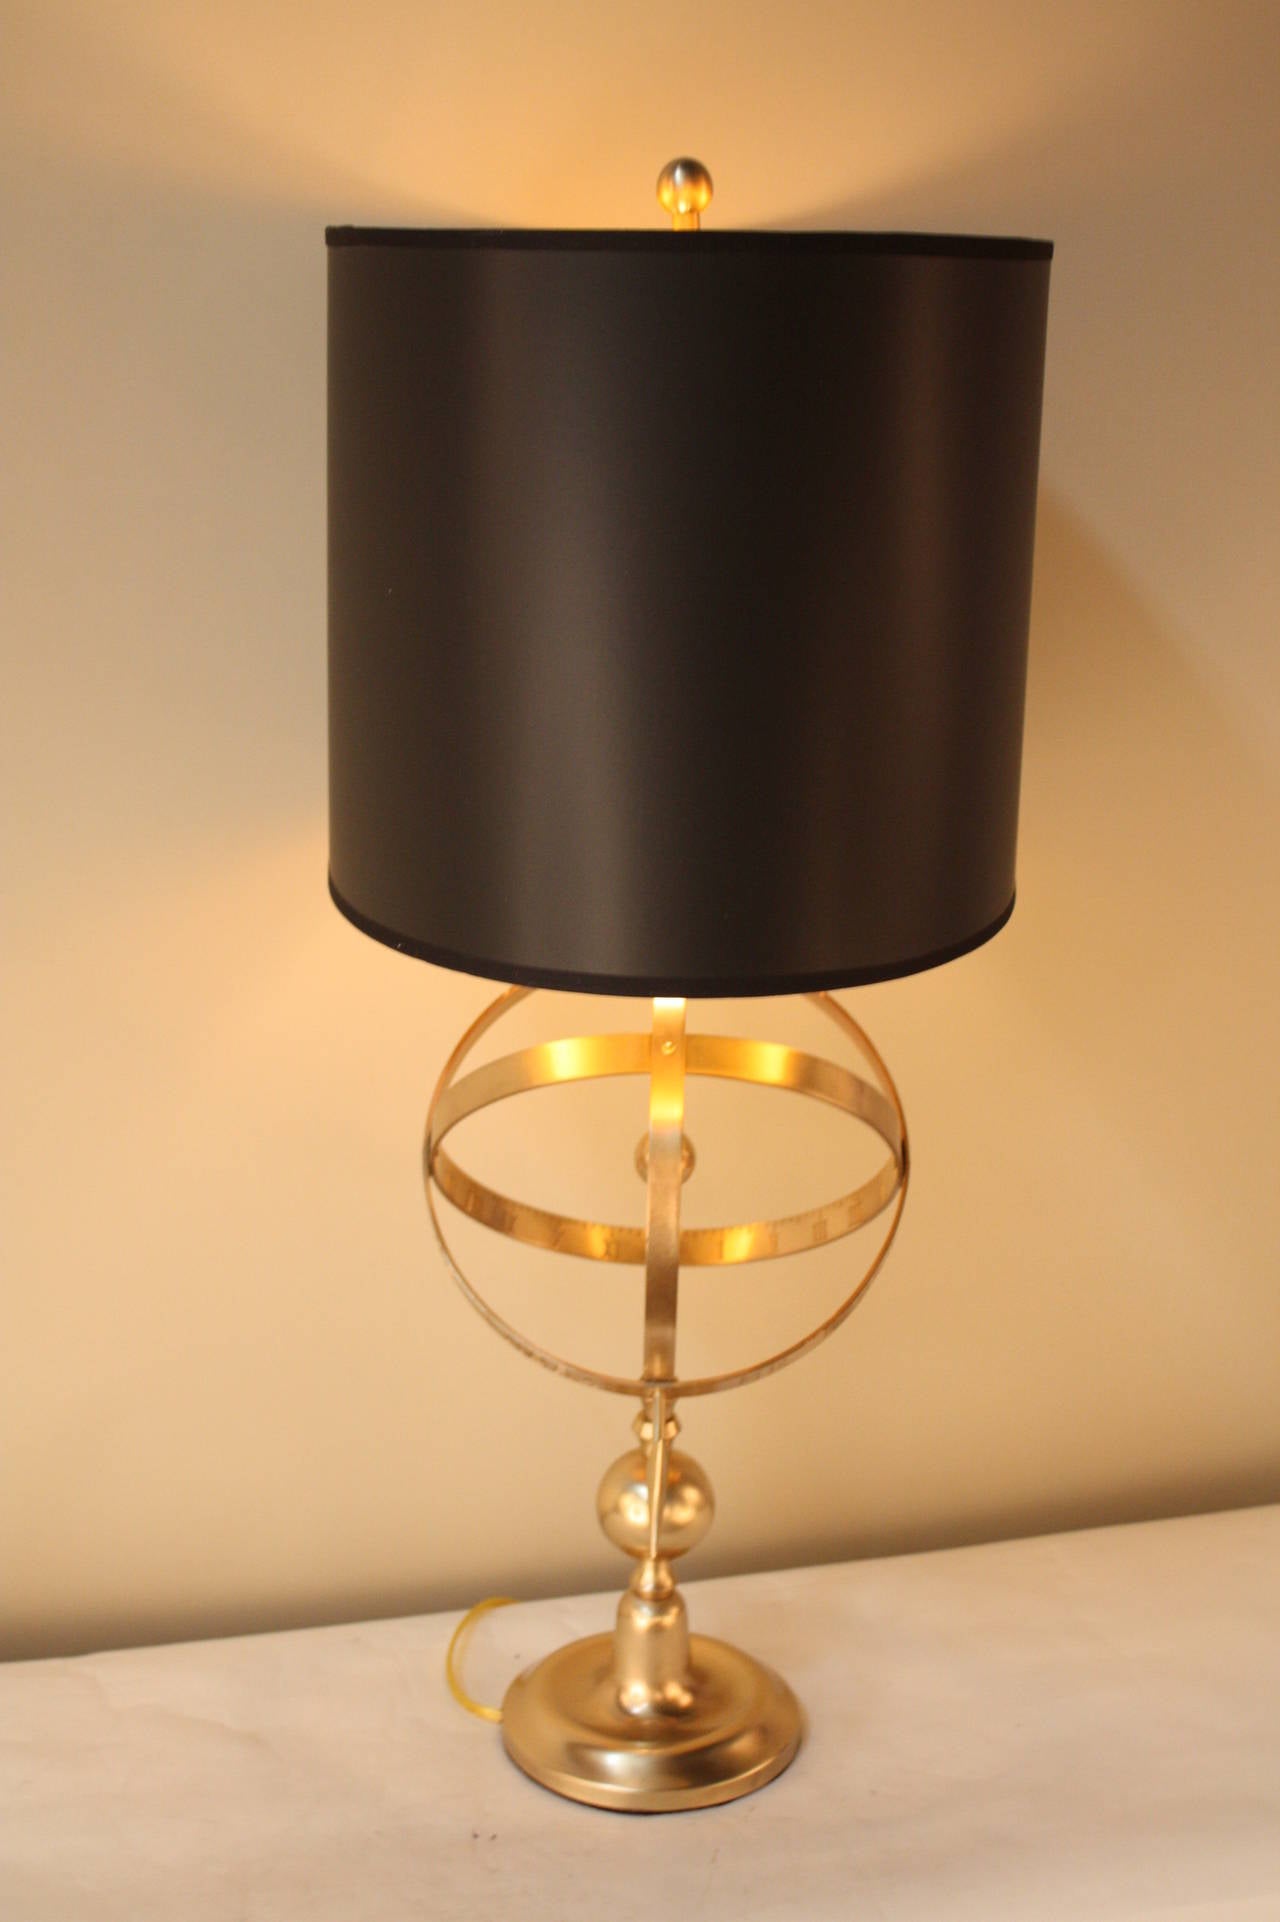 Mid-20th Century French Bronze Table Lamp with Armillary Sphere